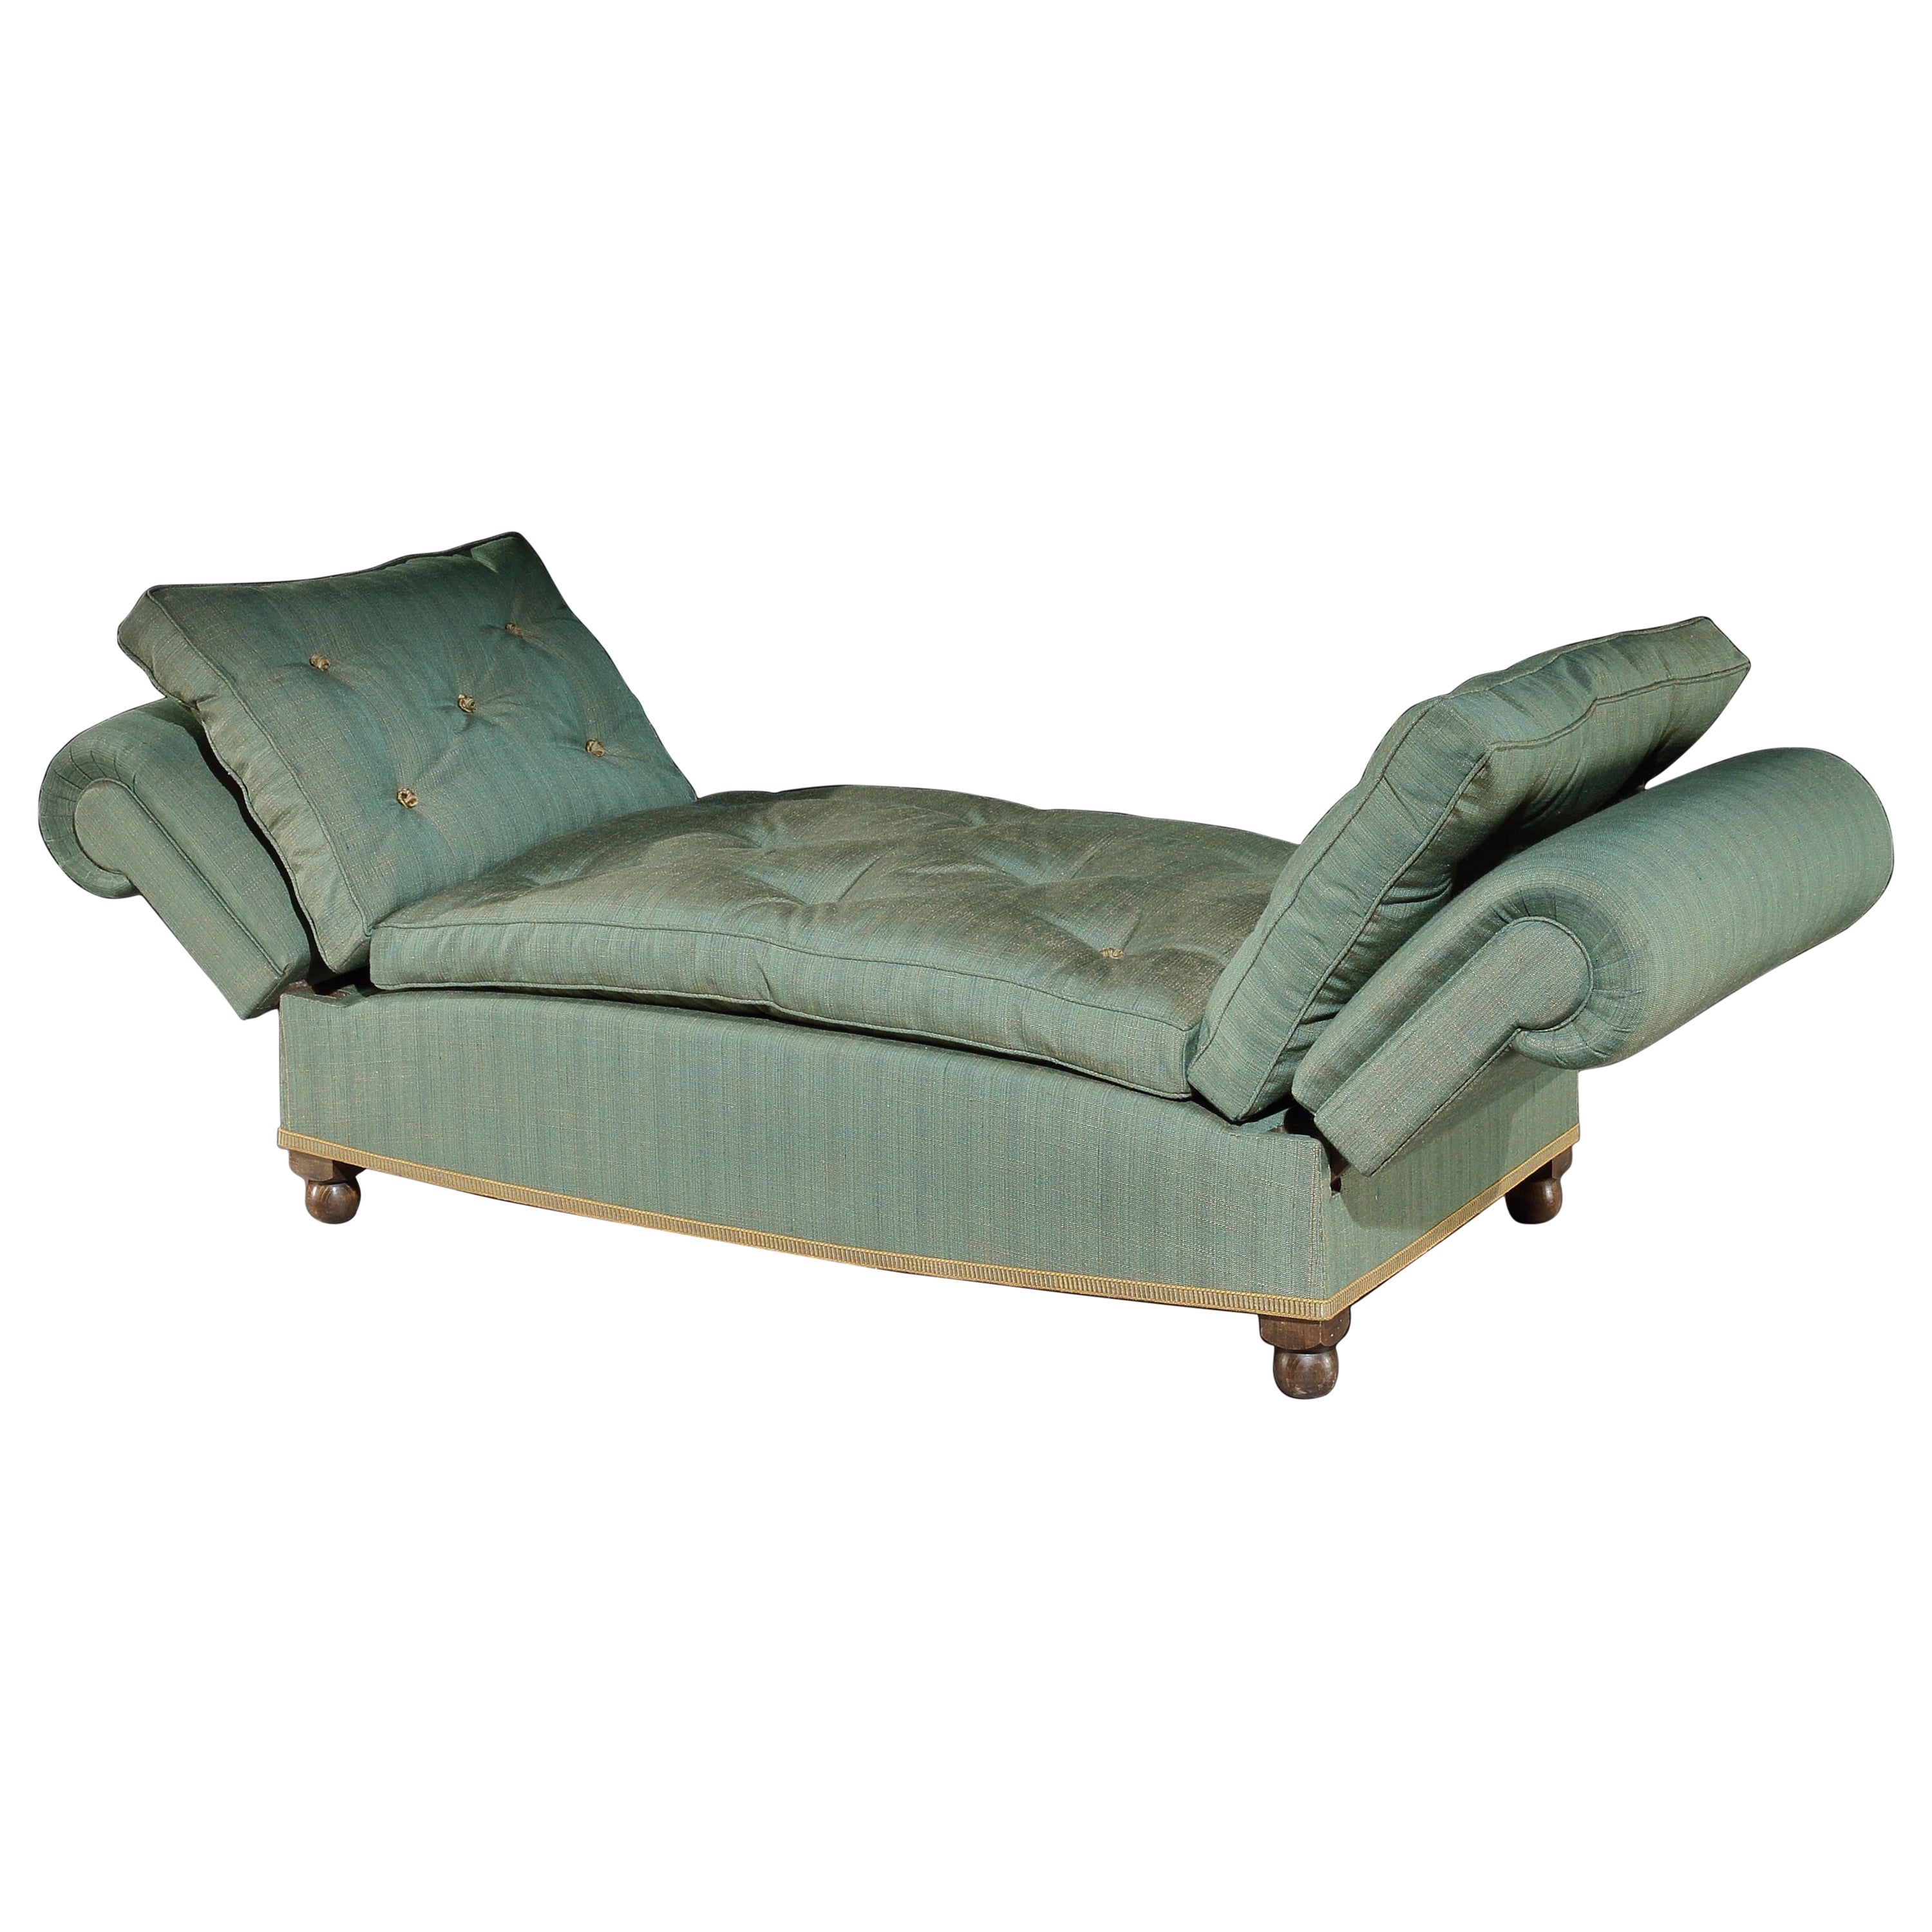 Daybed Settee Window-Seat Single-Bed Sofa-Bed Reclining Linen Green Gold Recline For Sale